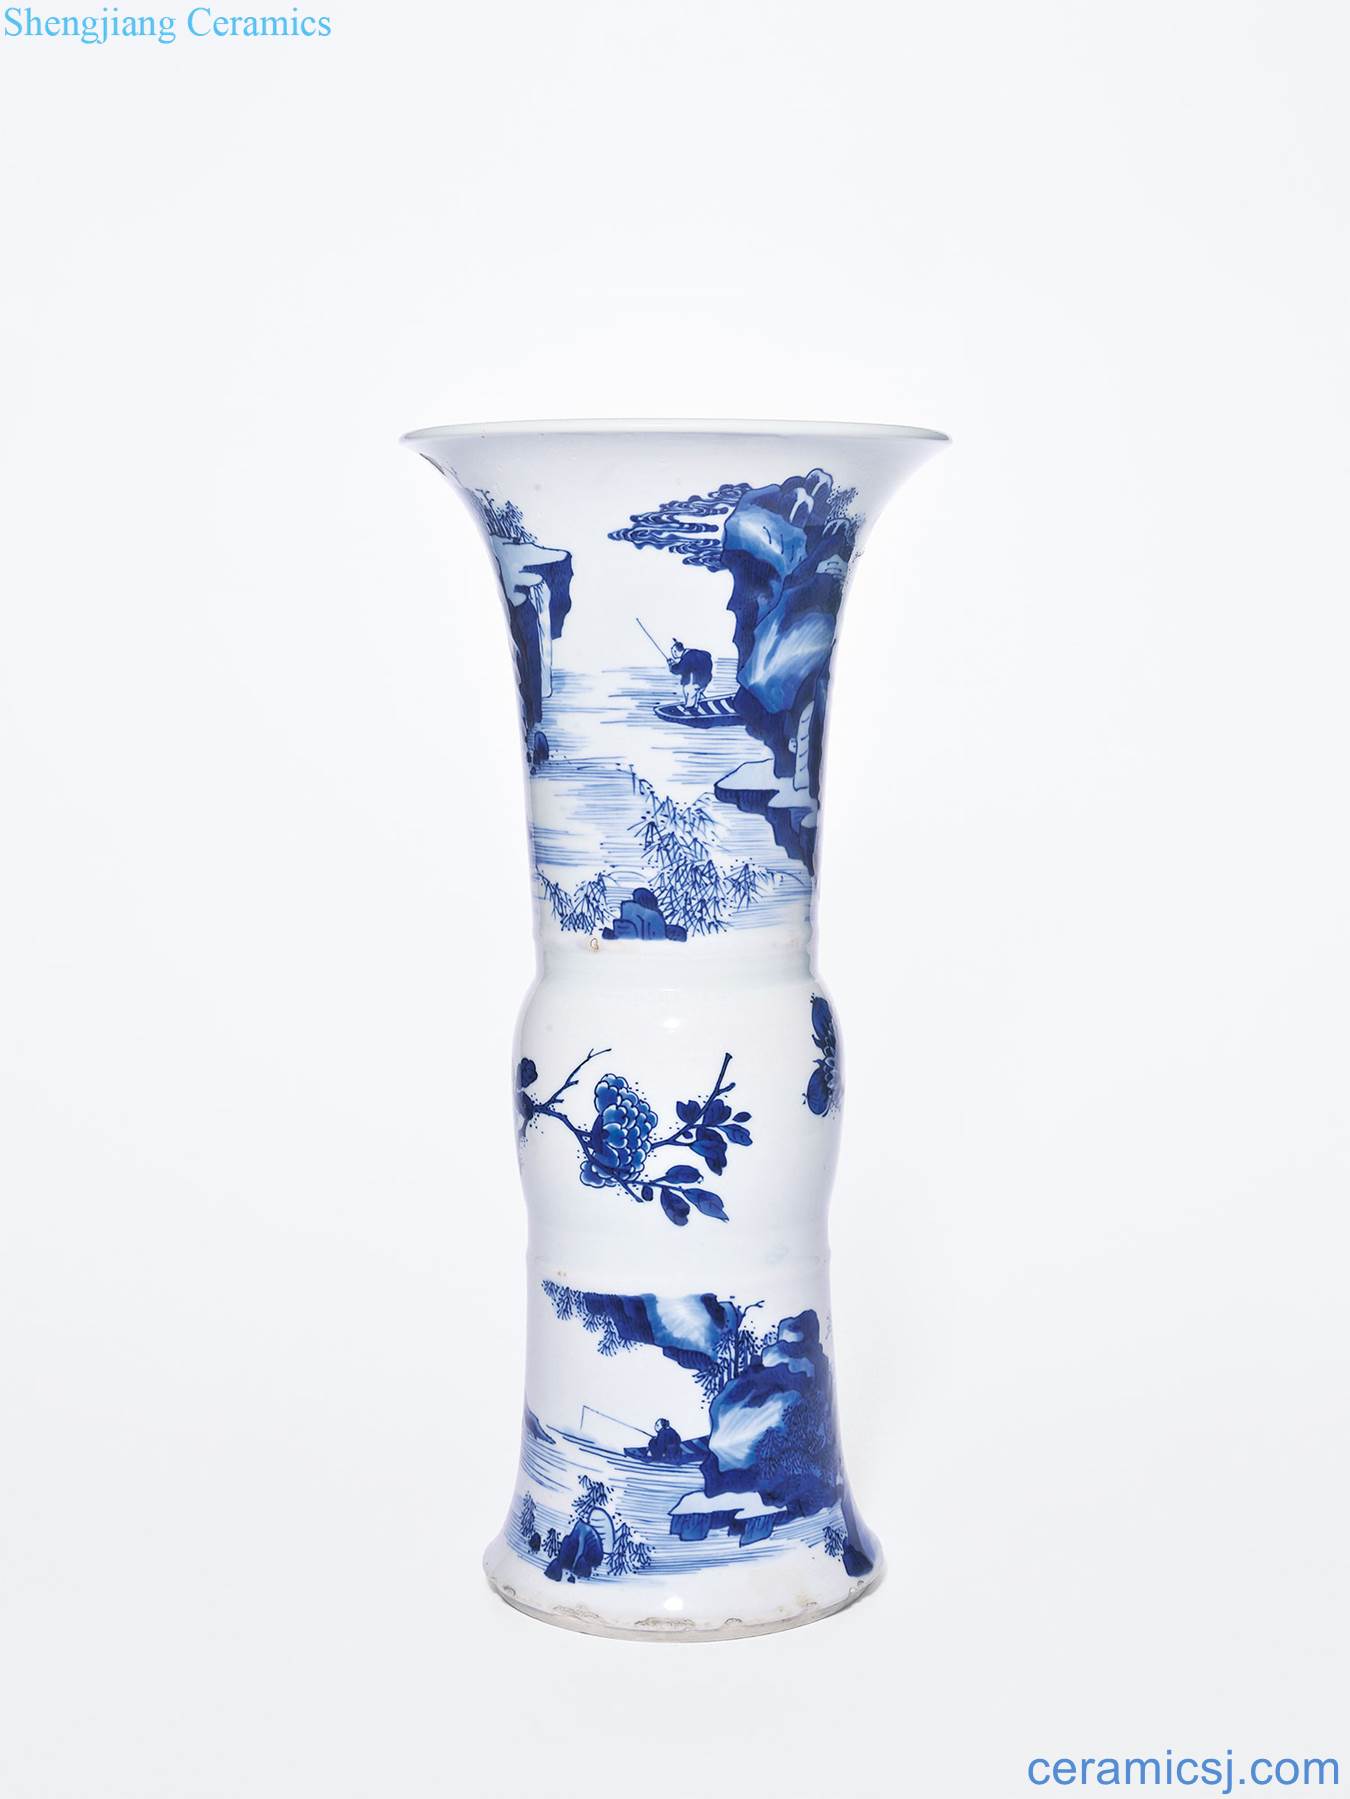 The qing emperor kangxi Grain flower vase with blue and white landscape characters